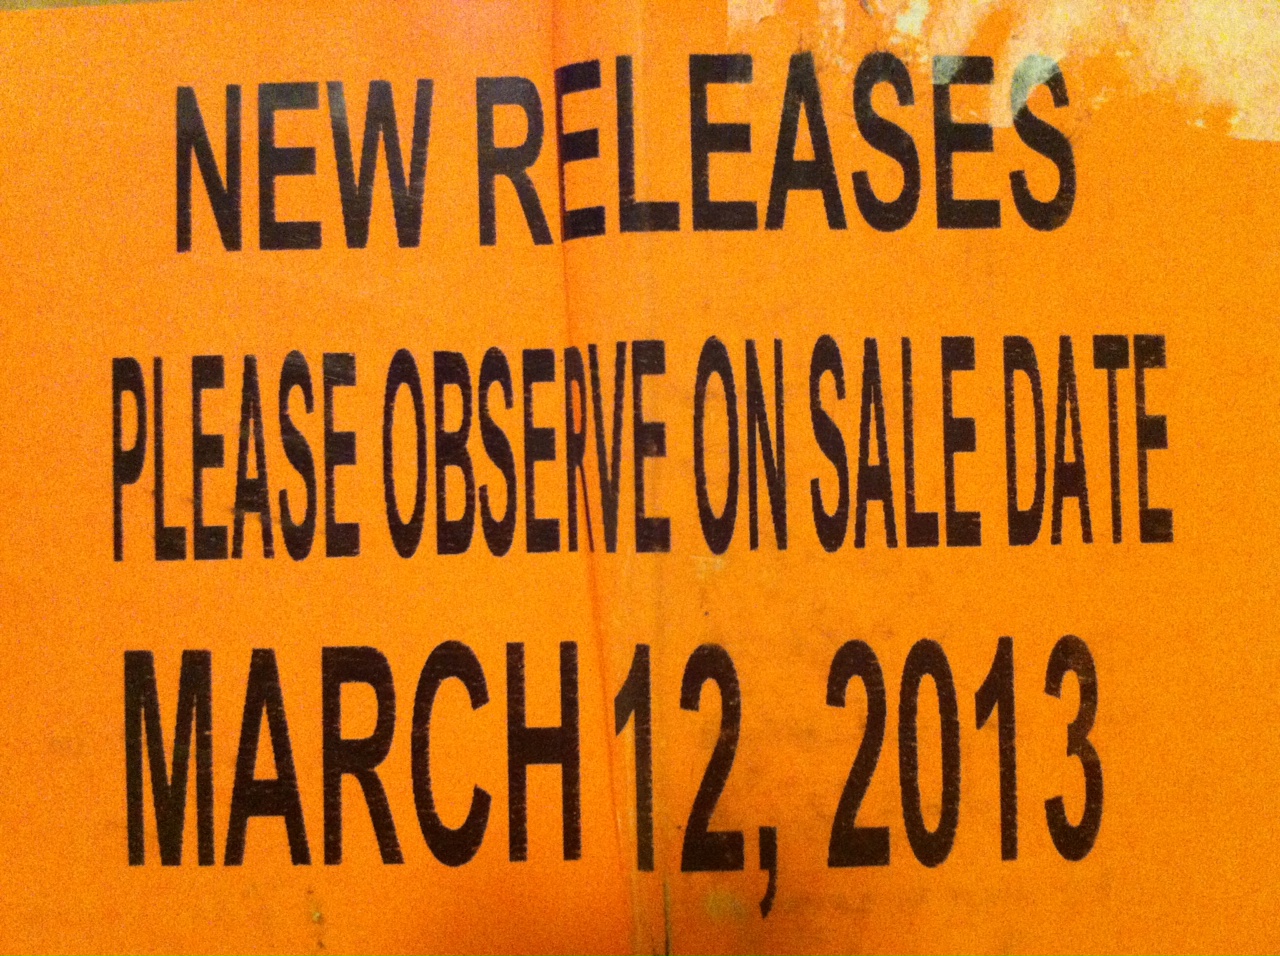 On sale date March 12, 2013